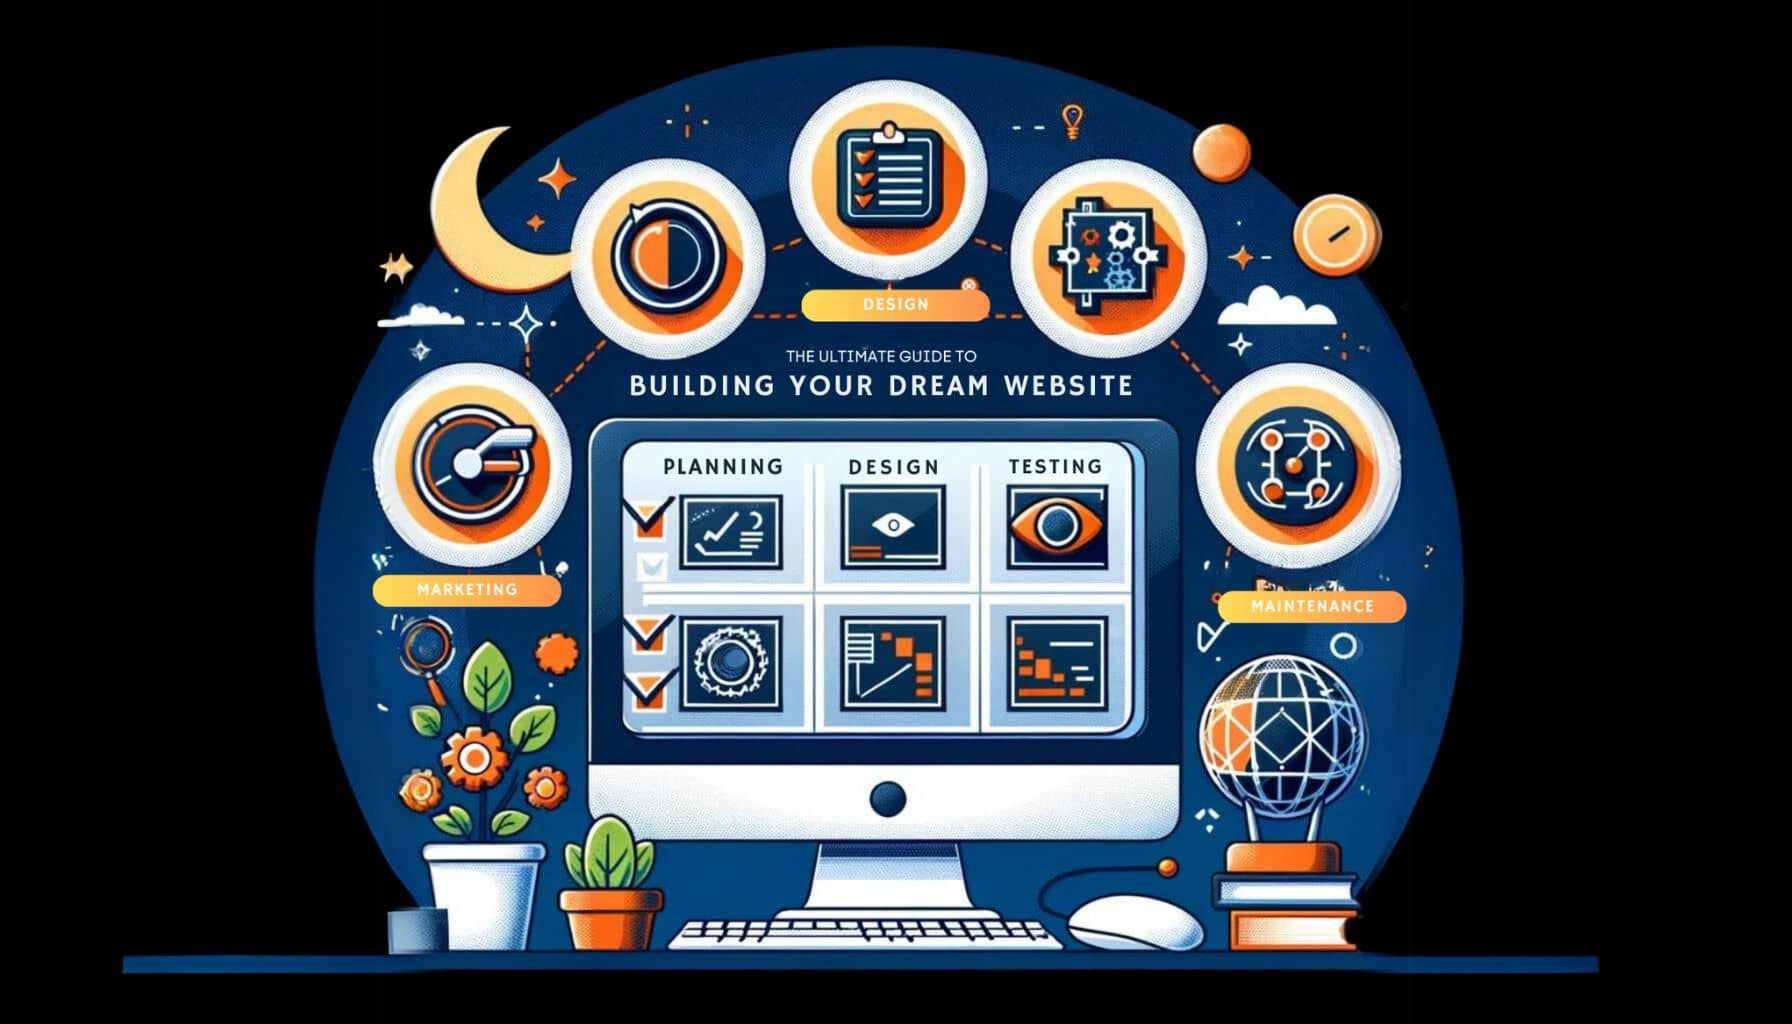 The Ultimate Guide to Building Your Dream Website in 6 Key Phases